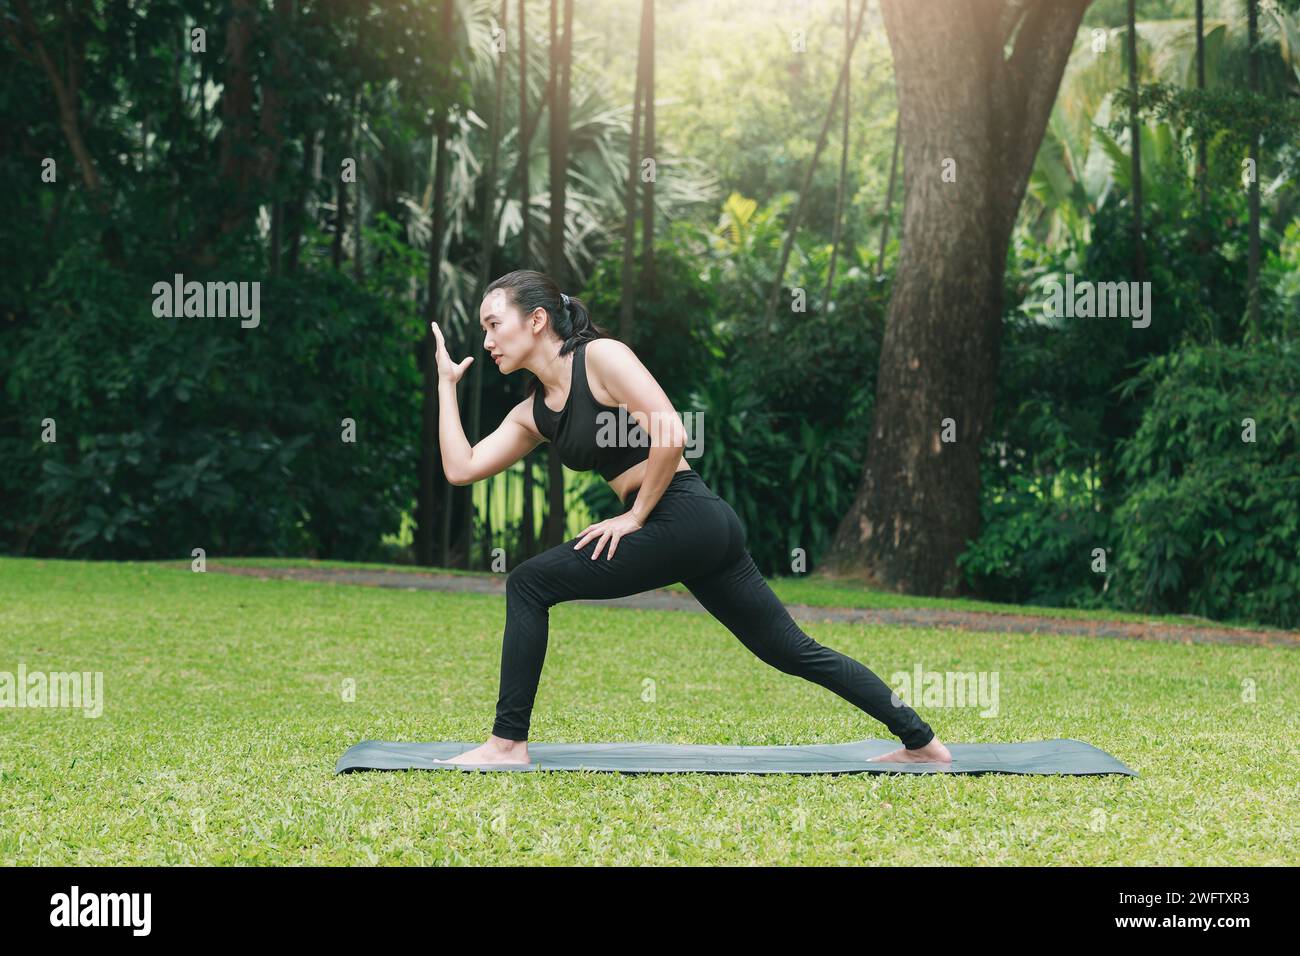 A Yoga Sequence That Teaches You How to Do Crow Pose